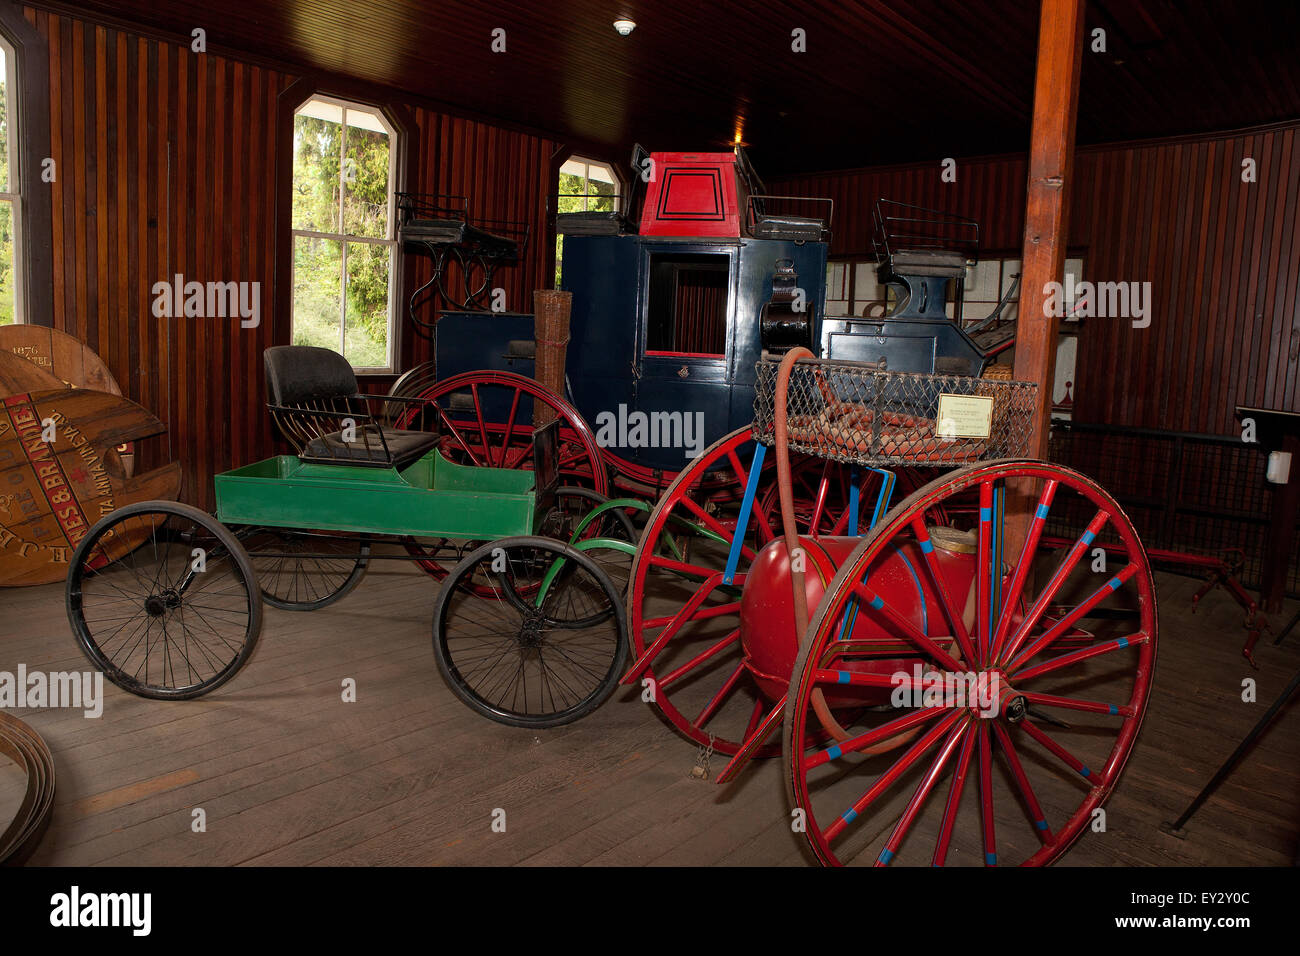 Carriages inside the Coach Barn, Los Angeles County Arboretum and Botanic Garden, Arcadia, California, United States of America Stock Photo